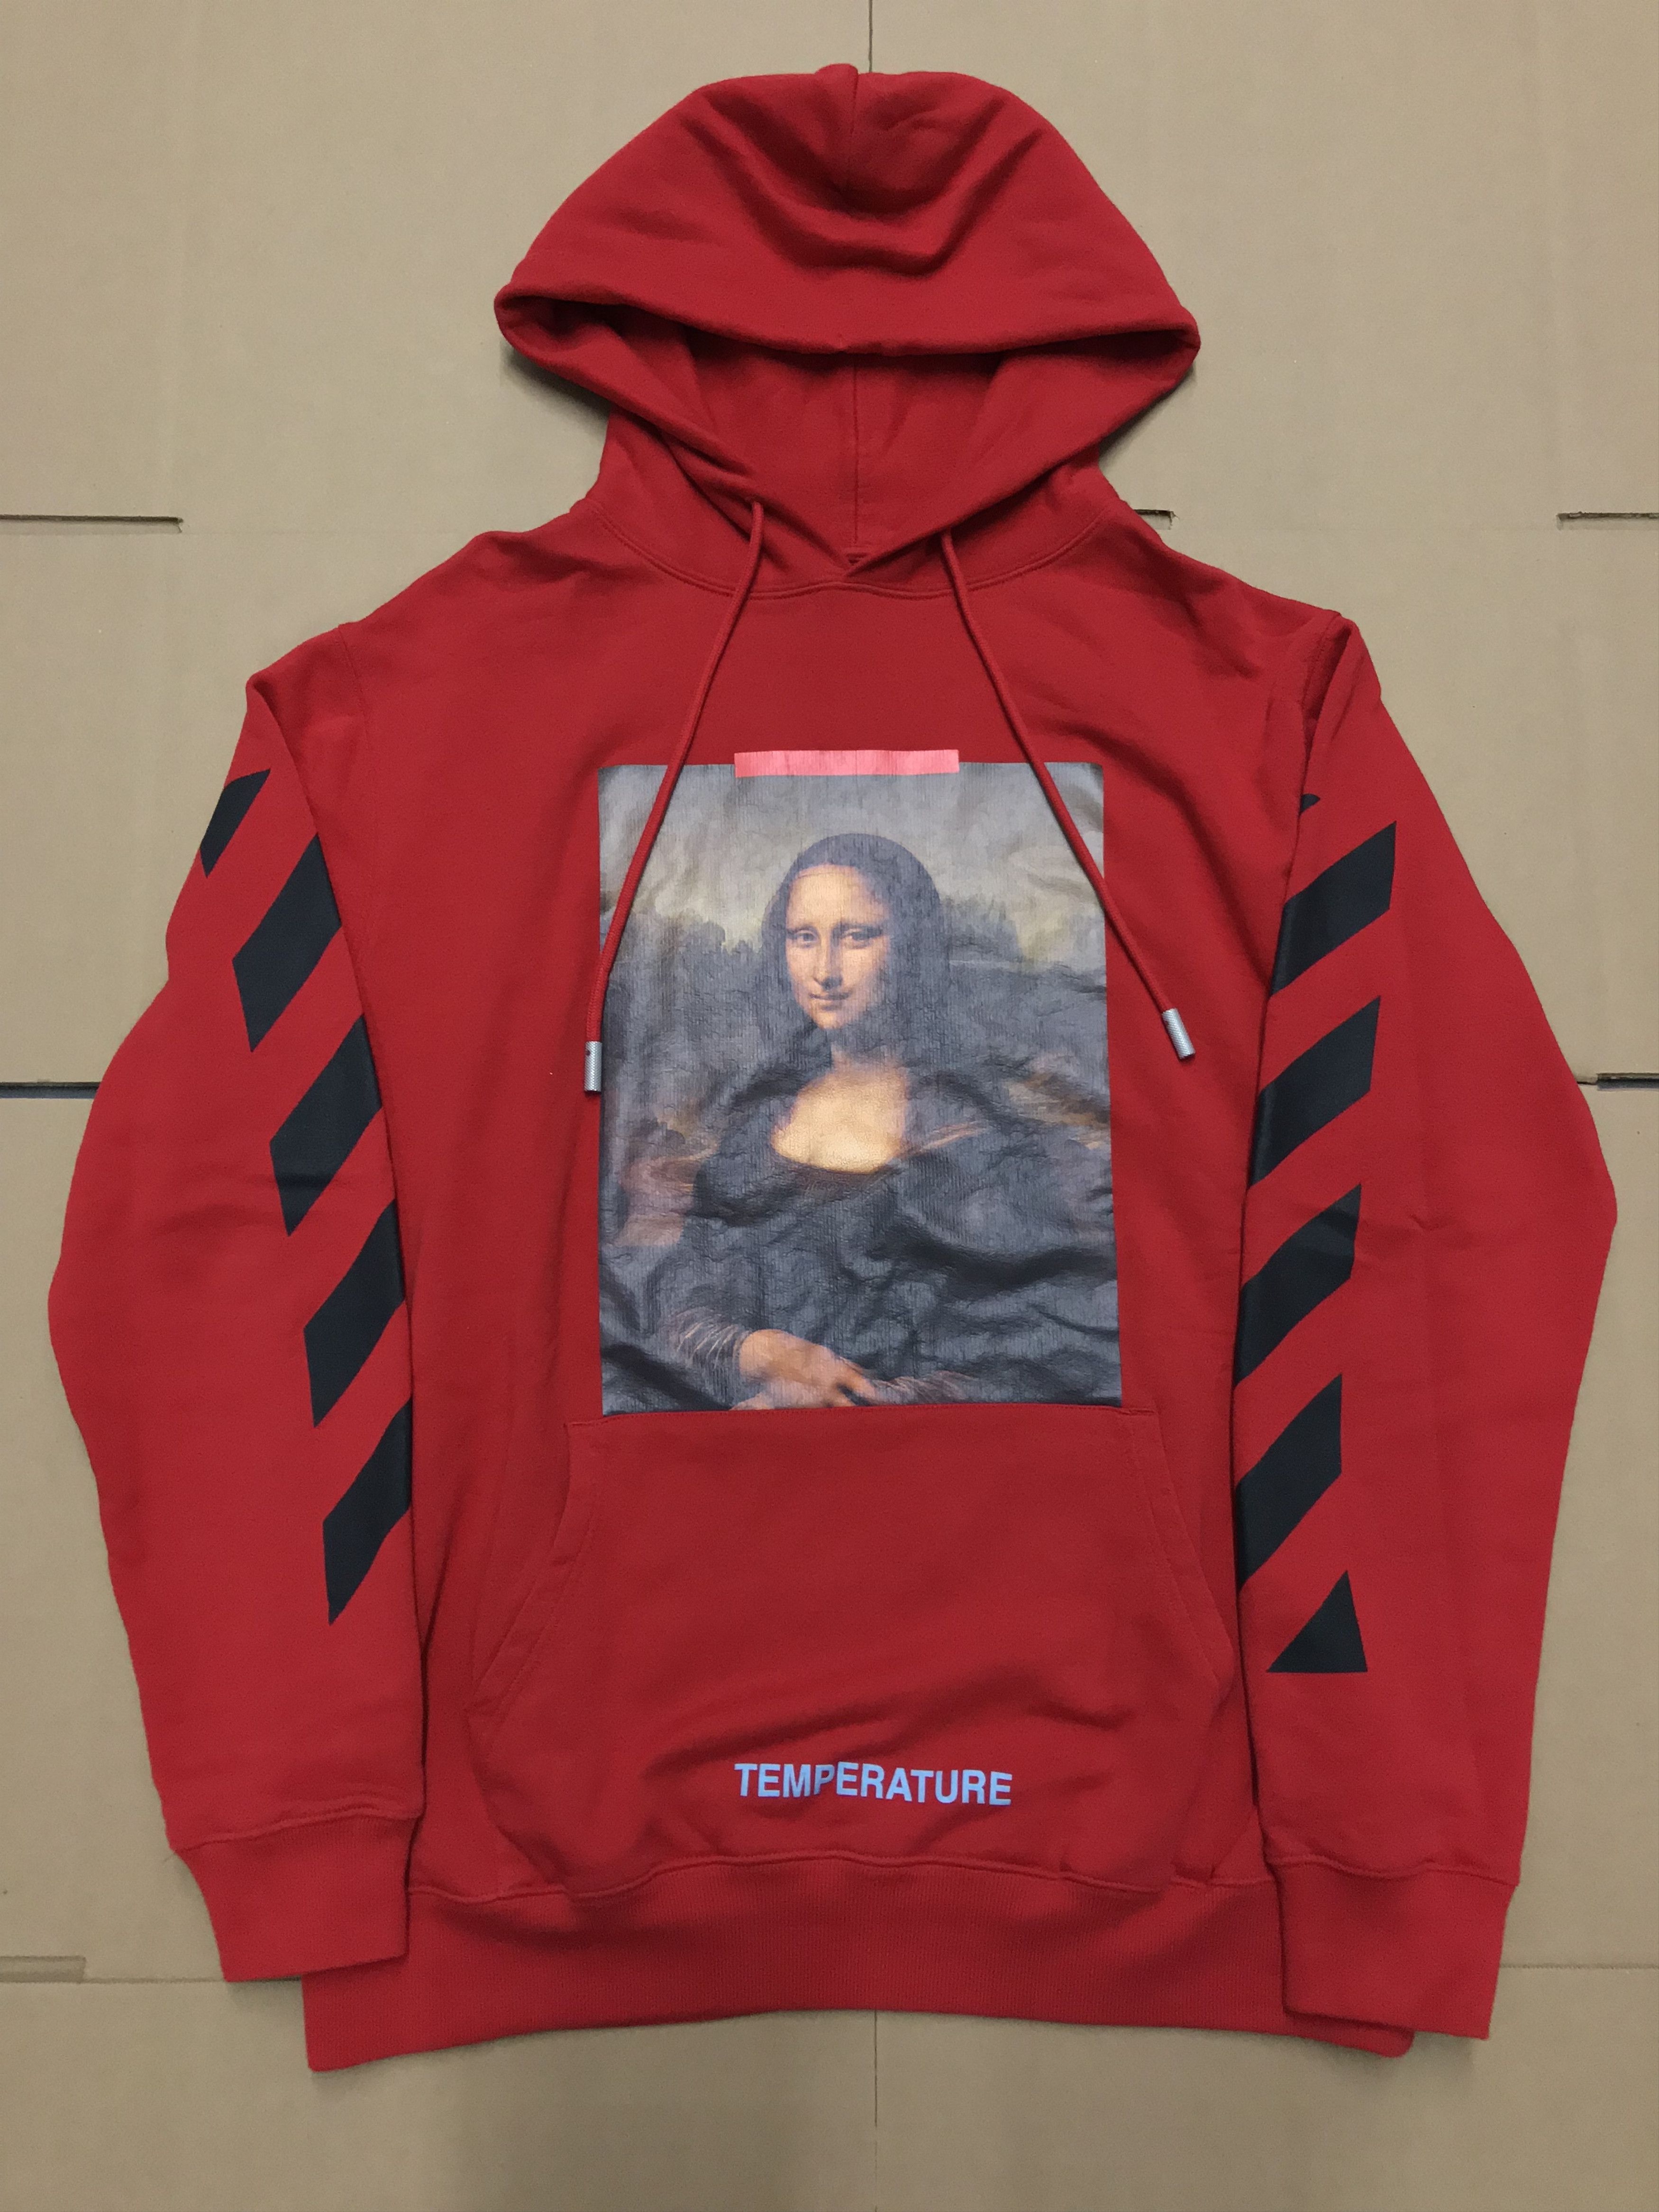 Off-White 2018 VIRGIL ABLOH OFF WHITE TEMPERATURE MONA LISA RED BLACK PULLOVER HOODIE SZ L Size US L / EU 52-54 / 3 - 1 Preview